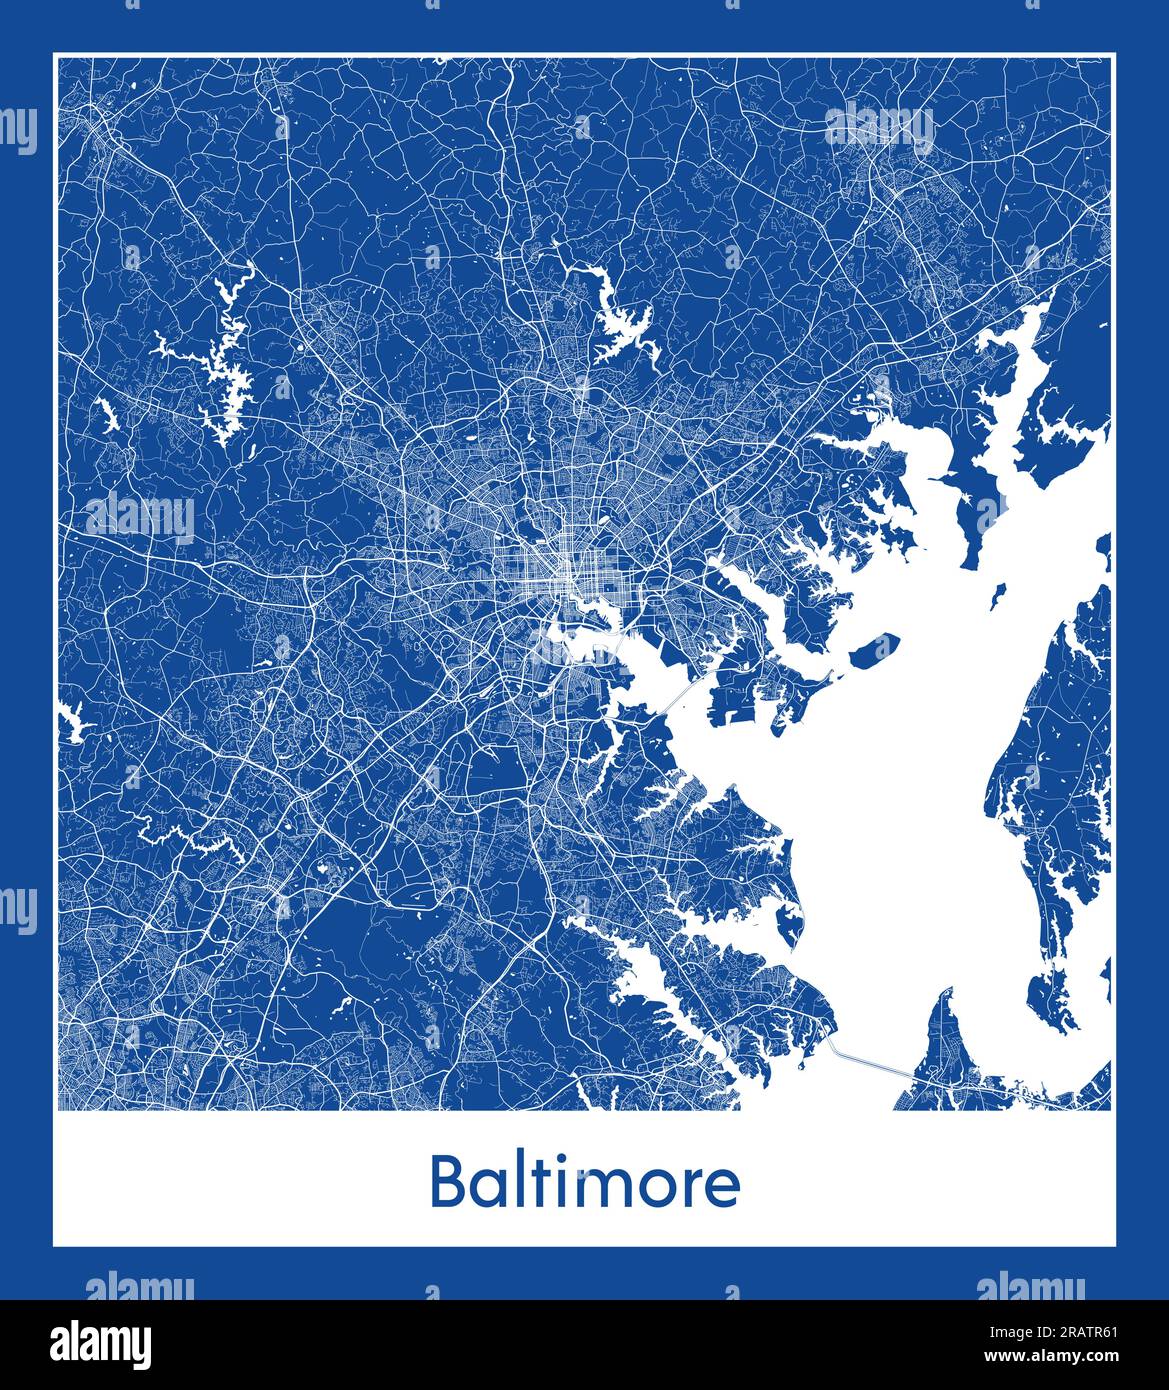 Baltimore United States North America City map blue print vector illustration Stock Vector